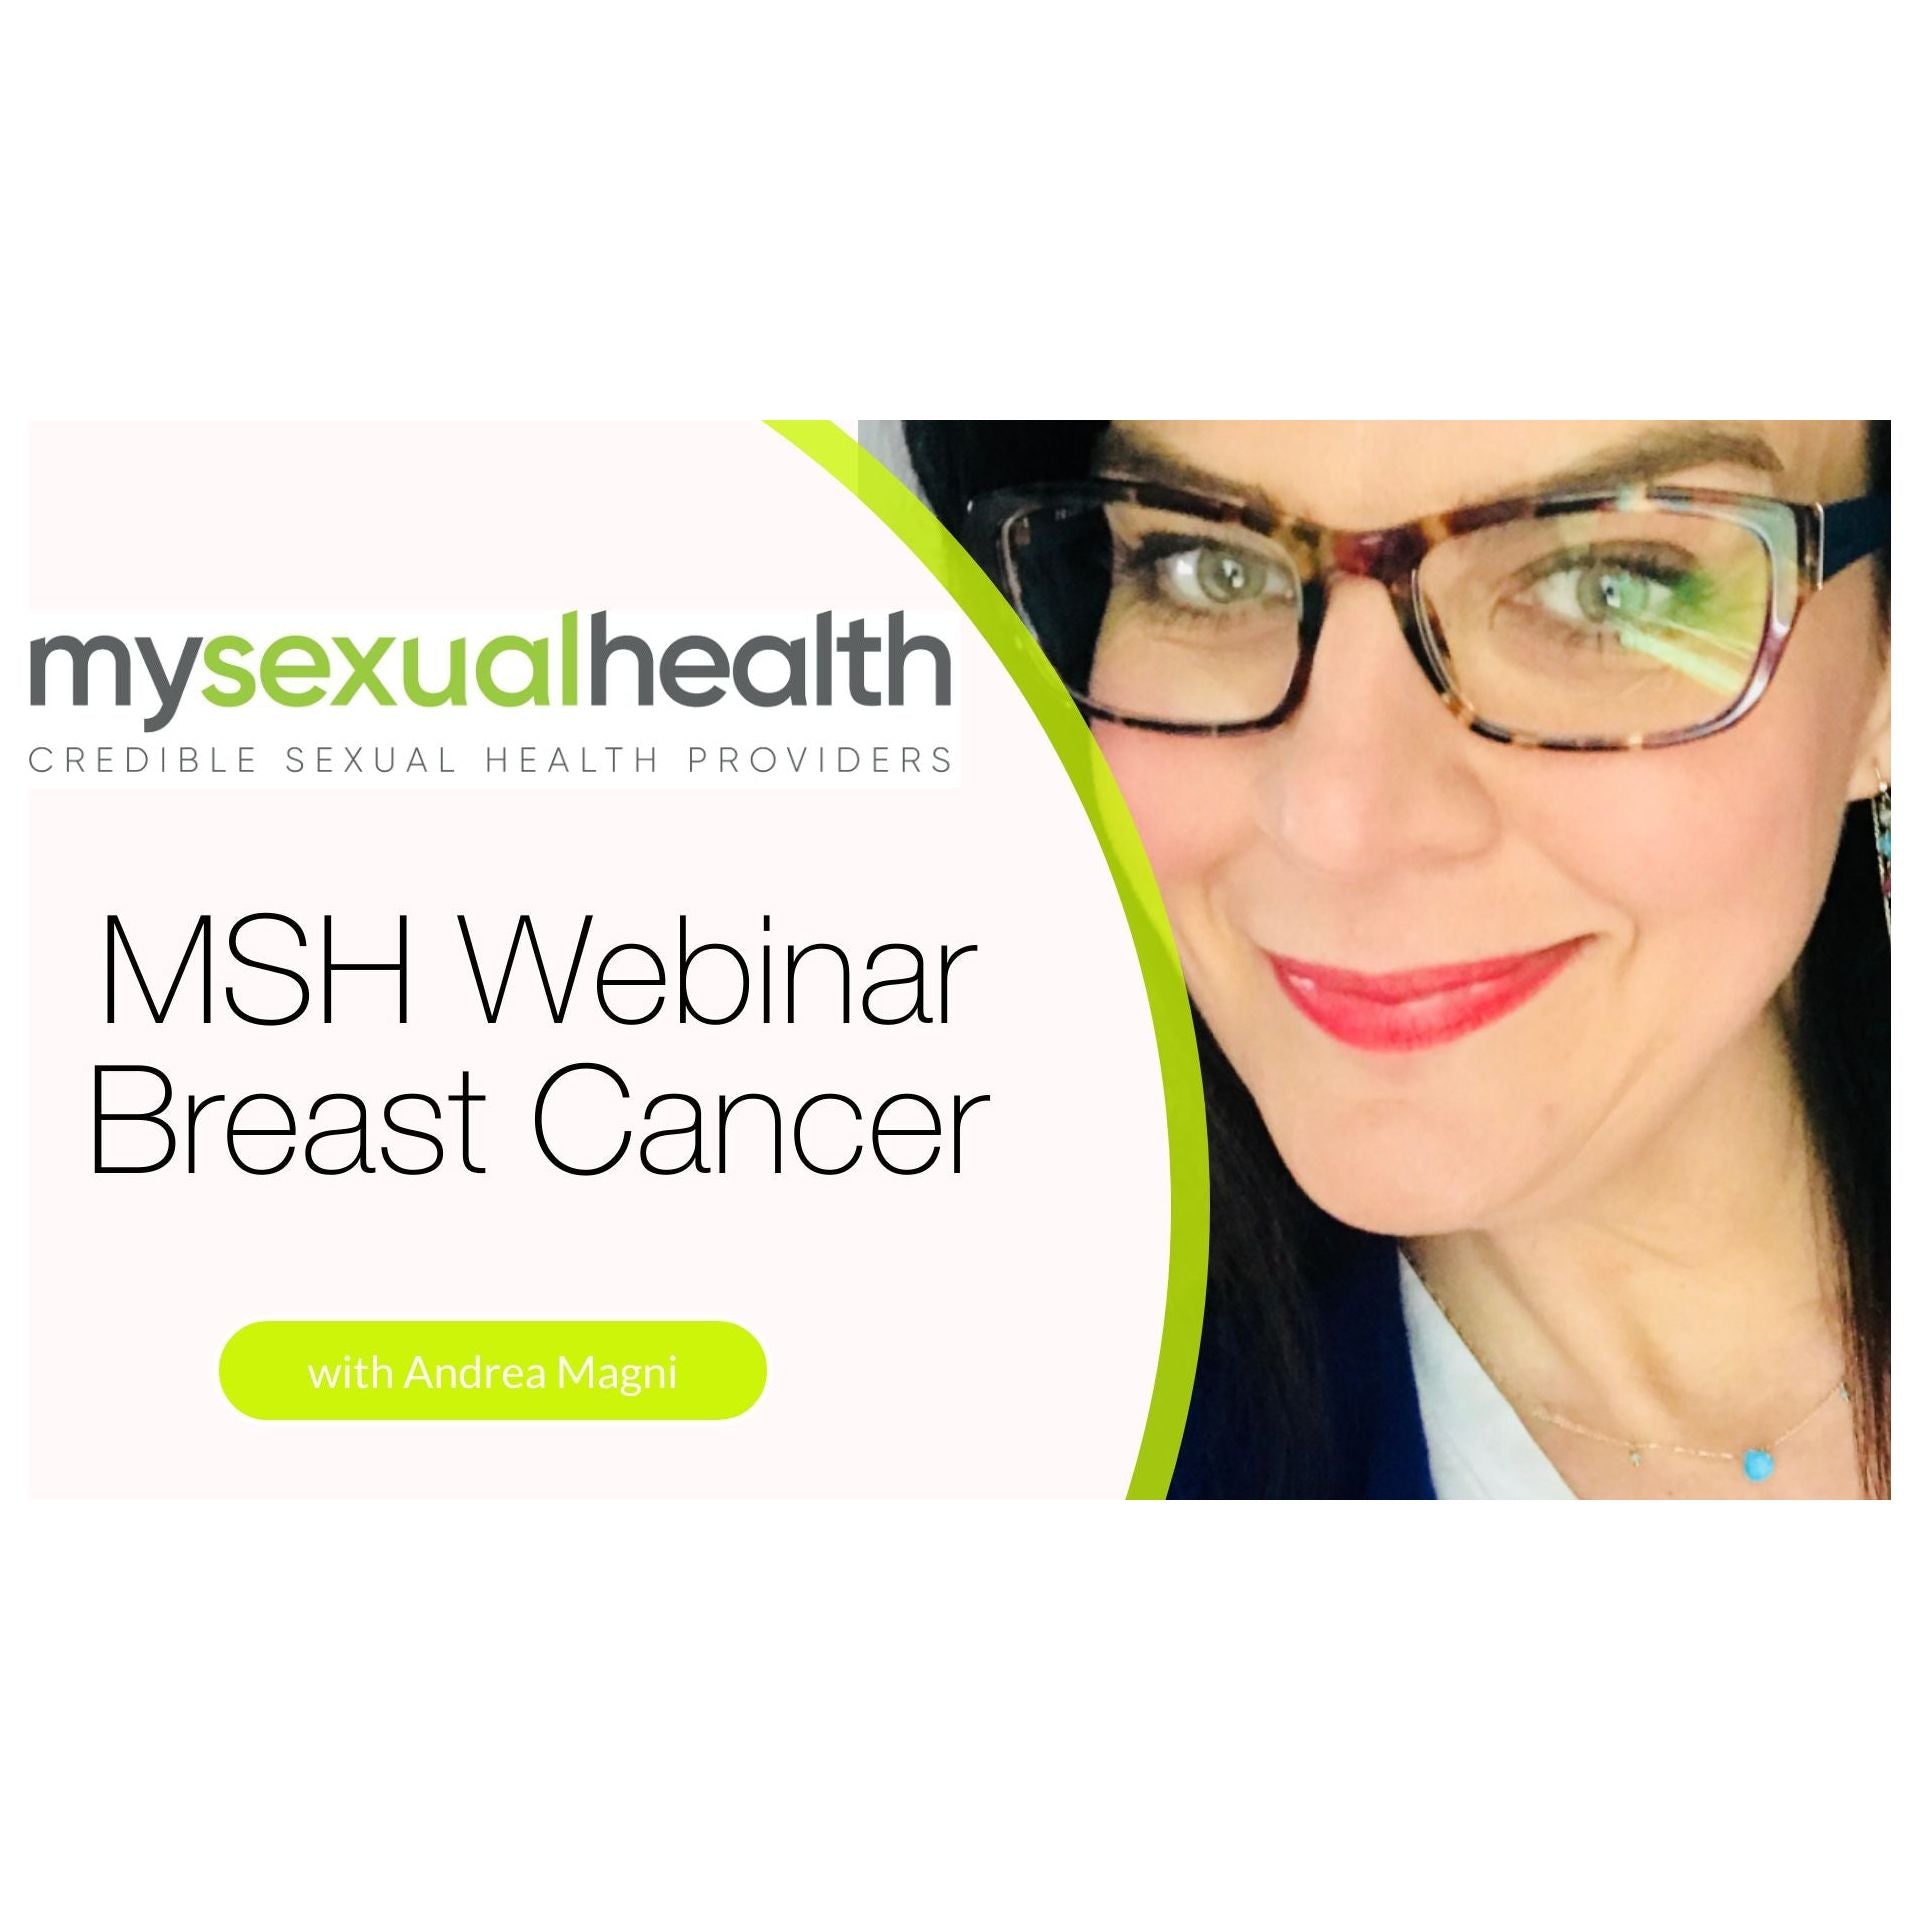 MSH WEBINAR: Breast Cancer with Andrea Magni and Dr Elna Rudolph